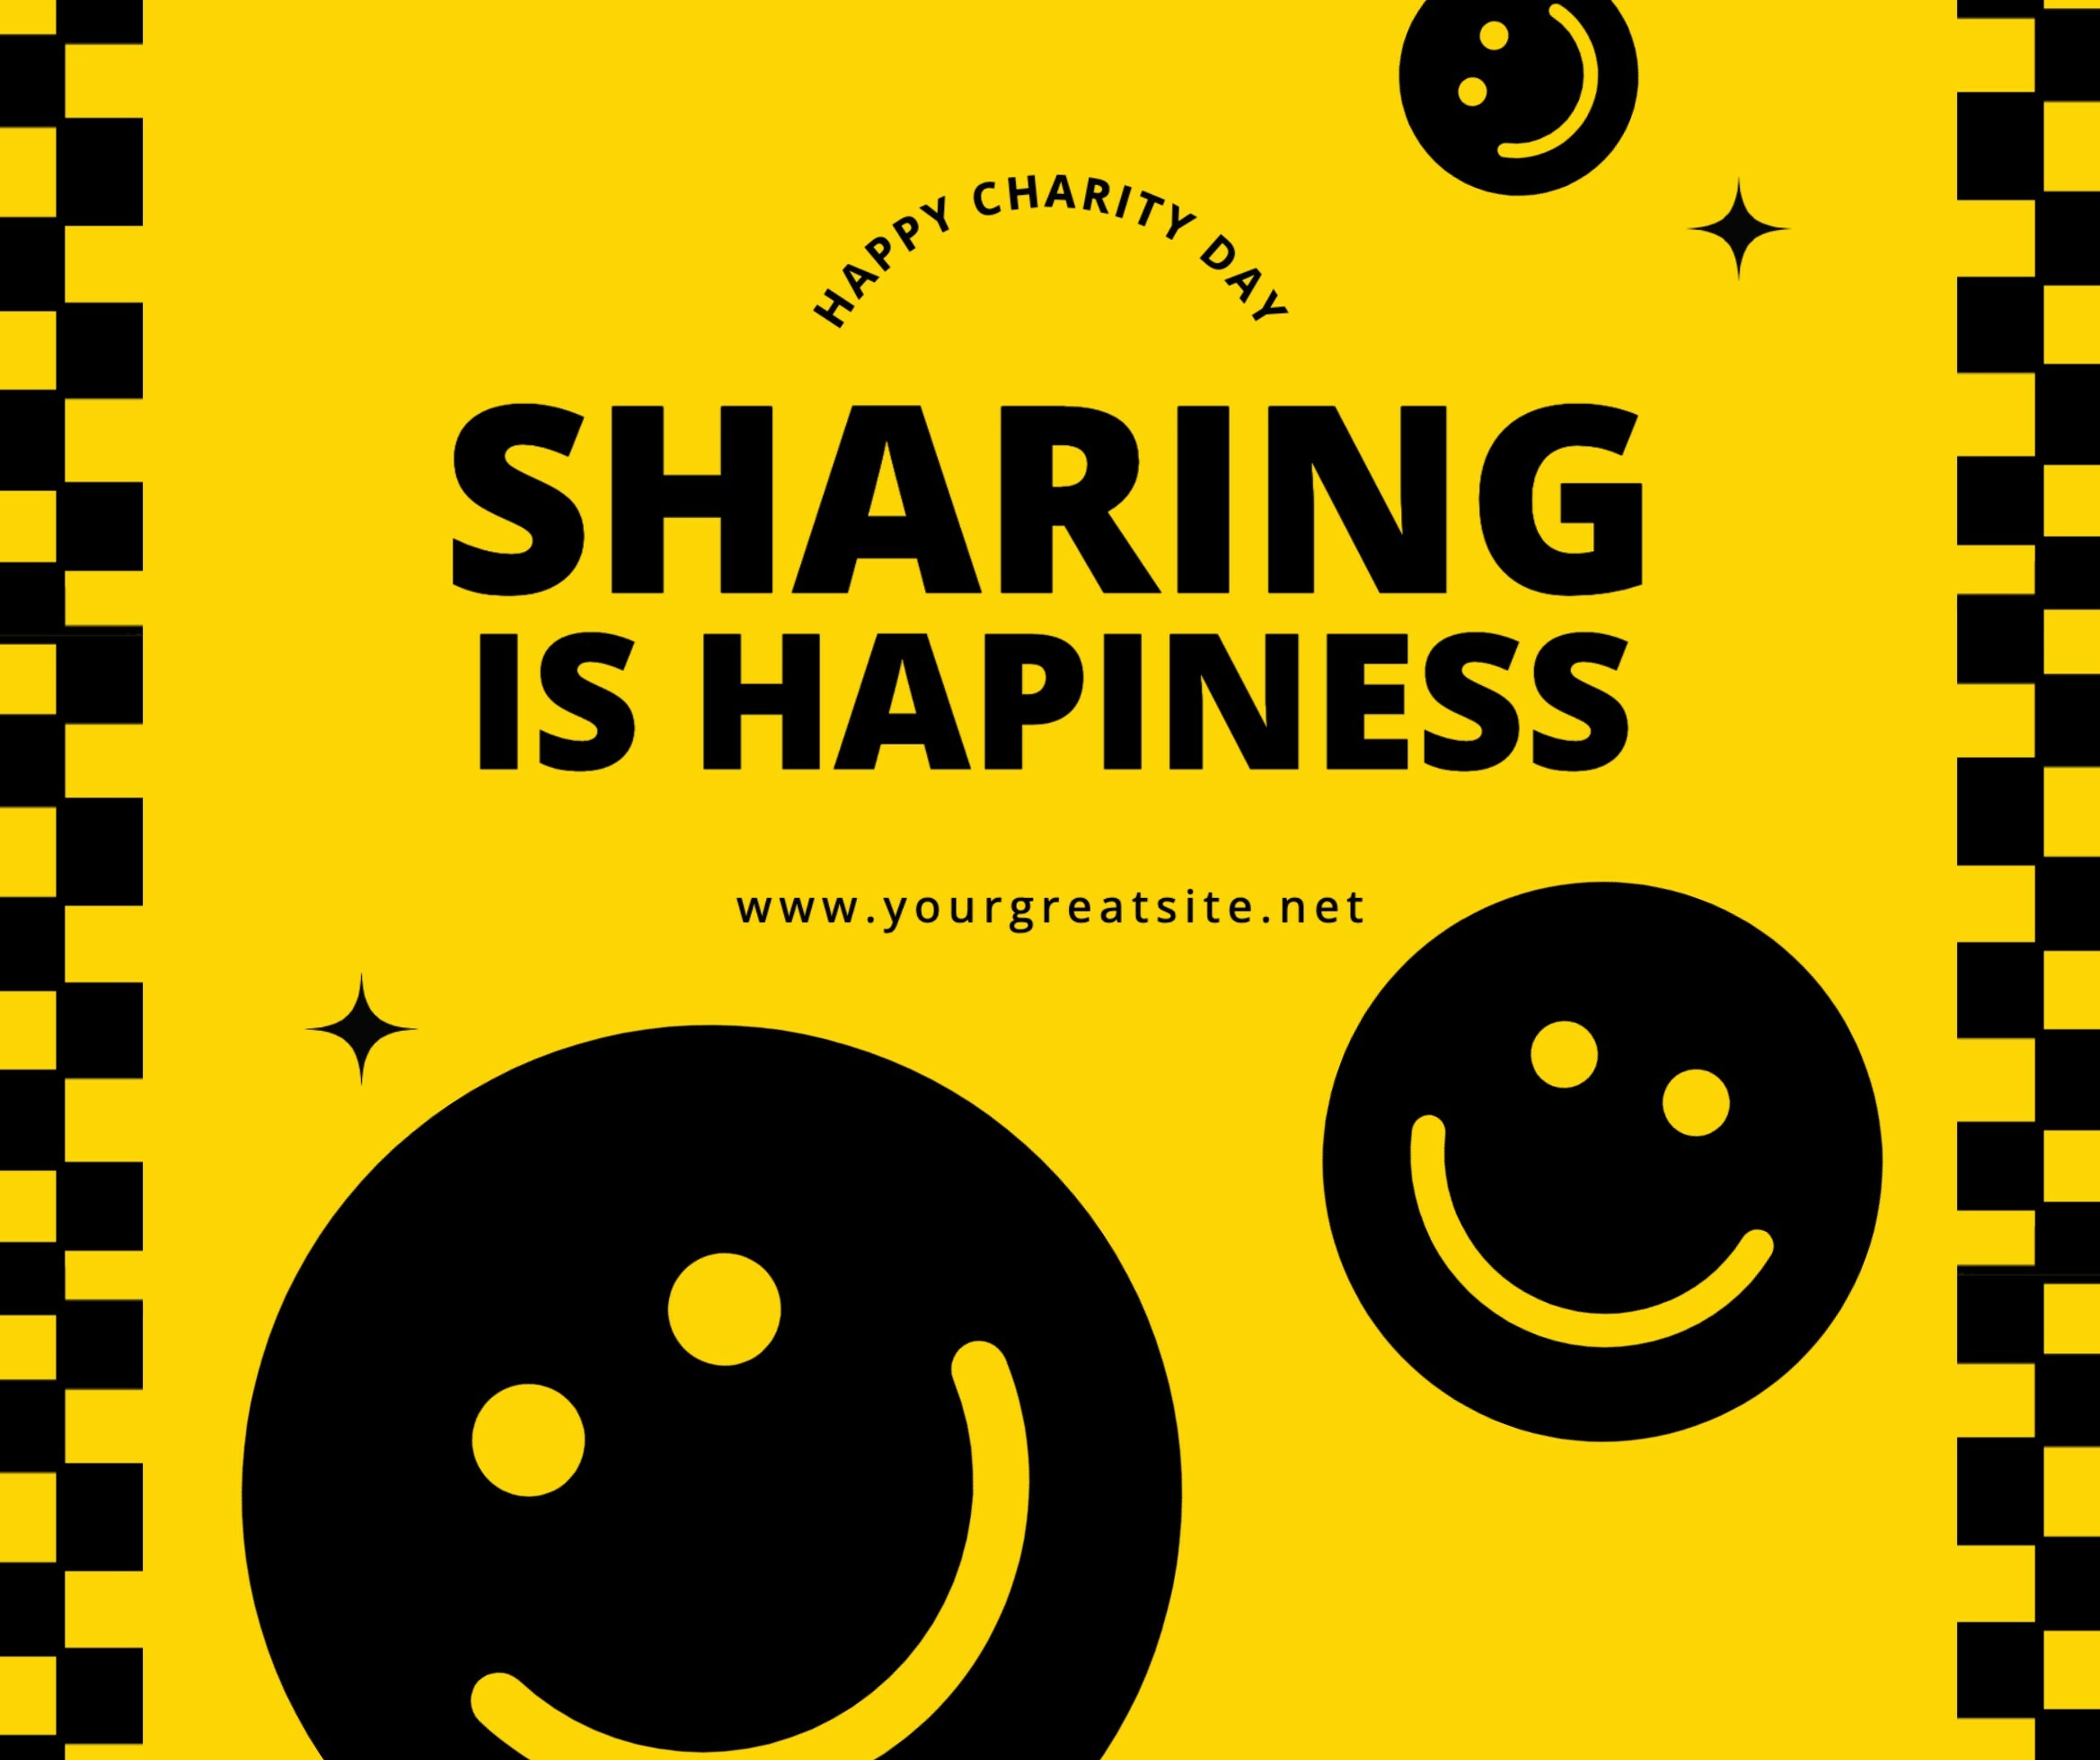 smile charity social media post design ideas in yellow